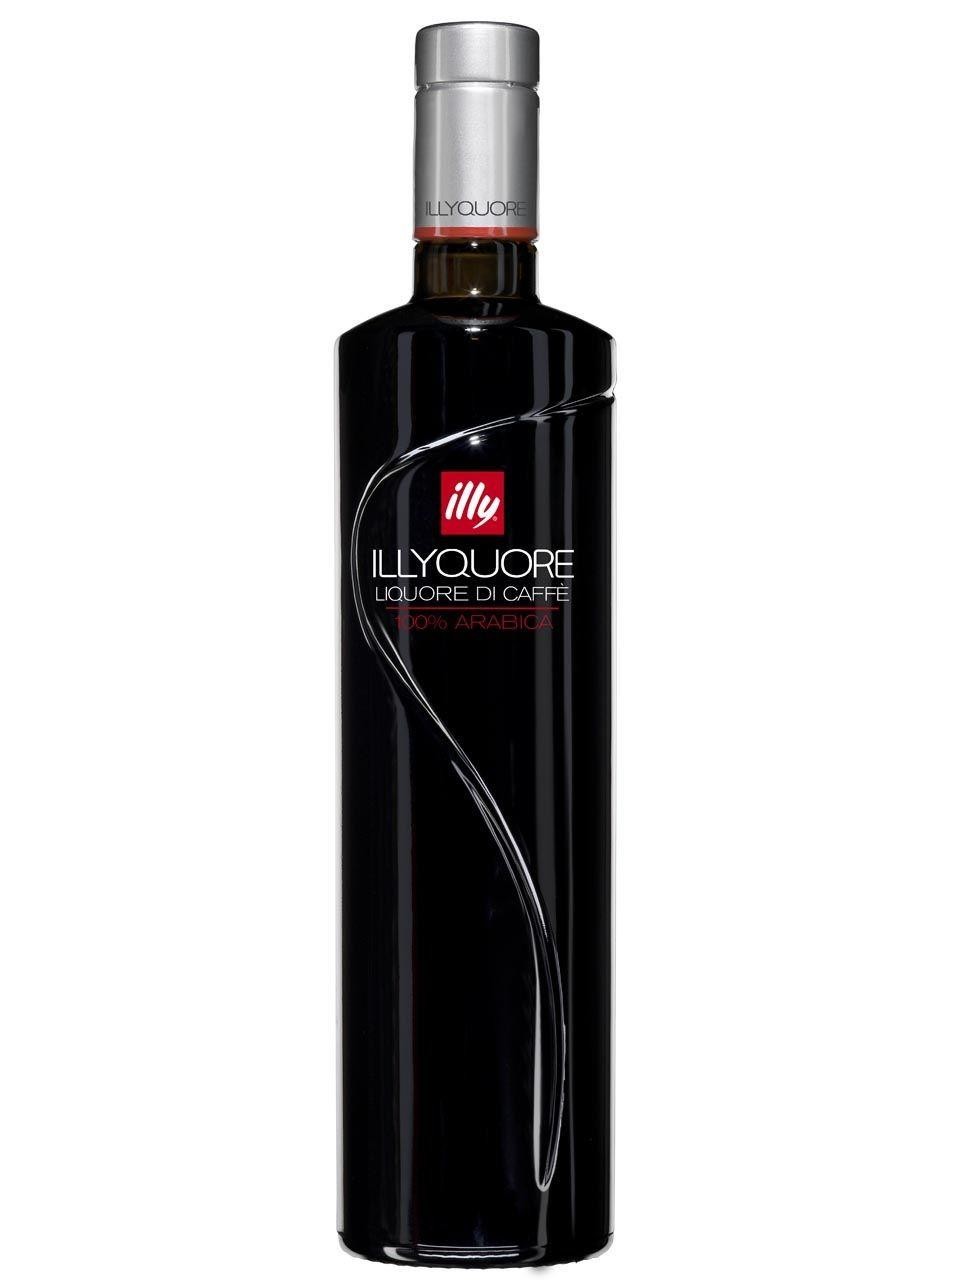 Illyquore 1L 28% Illy Koffielikeur liquore di caffe